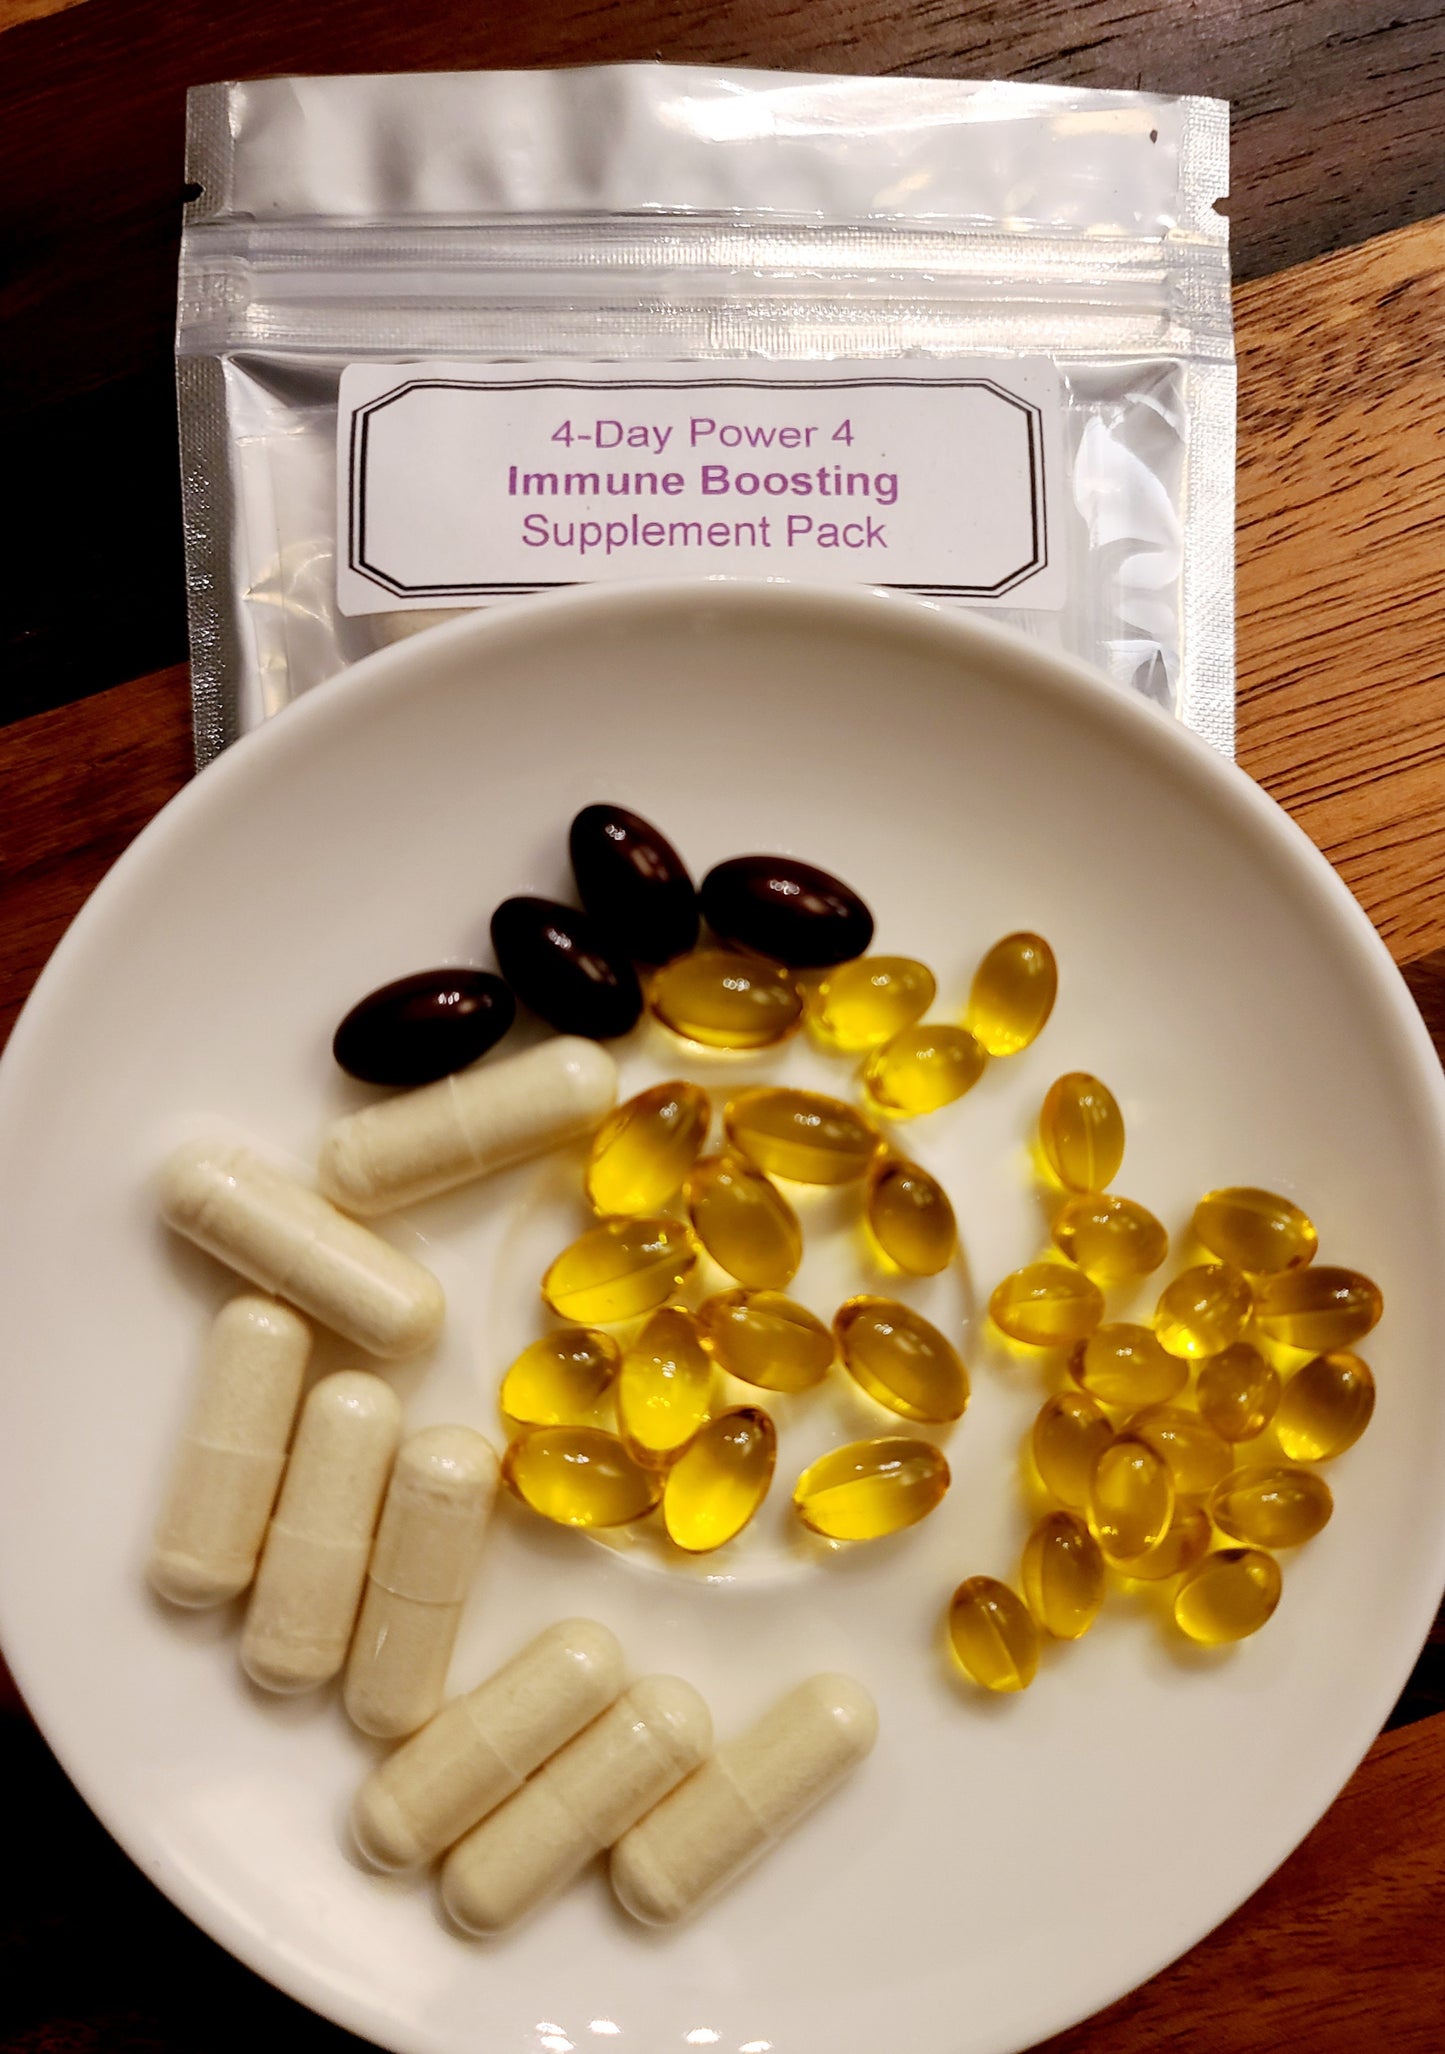 Picture of 4 Day Power 4 Immune Boosting Supplement Pack with a display of vitamins in a bowl on wooden countertop 